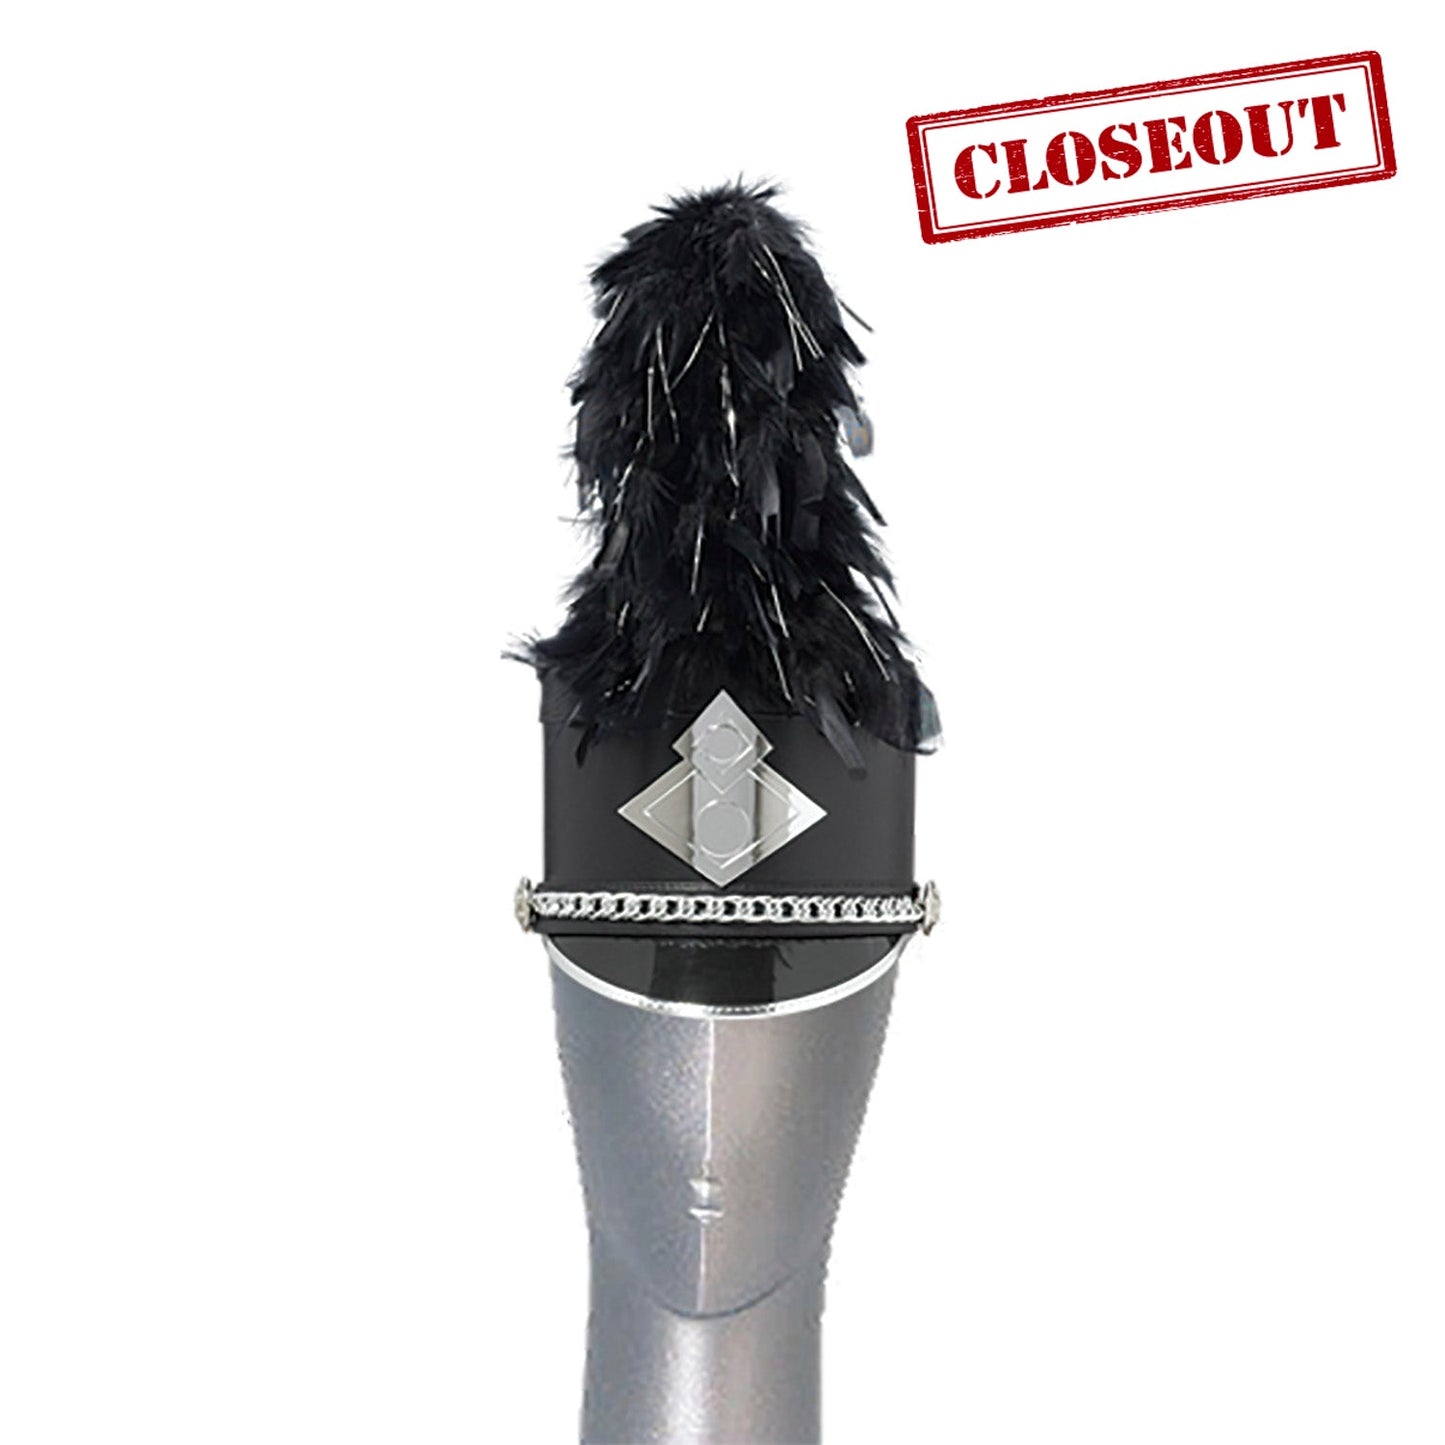 Closeout French Fountain Plume with Mylar